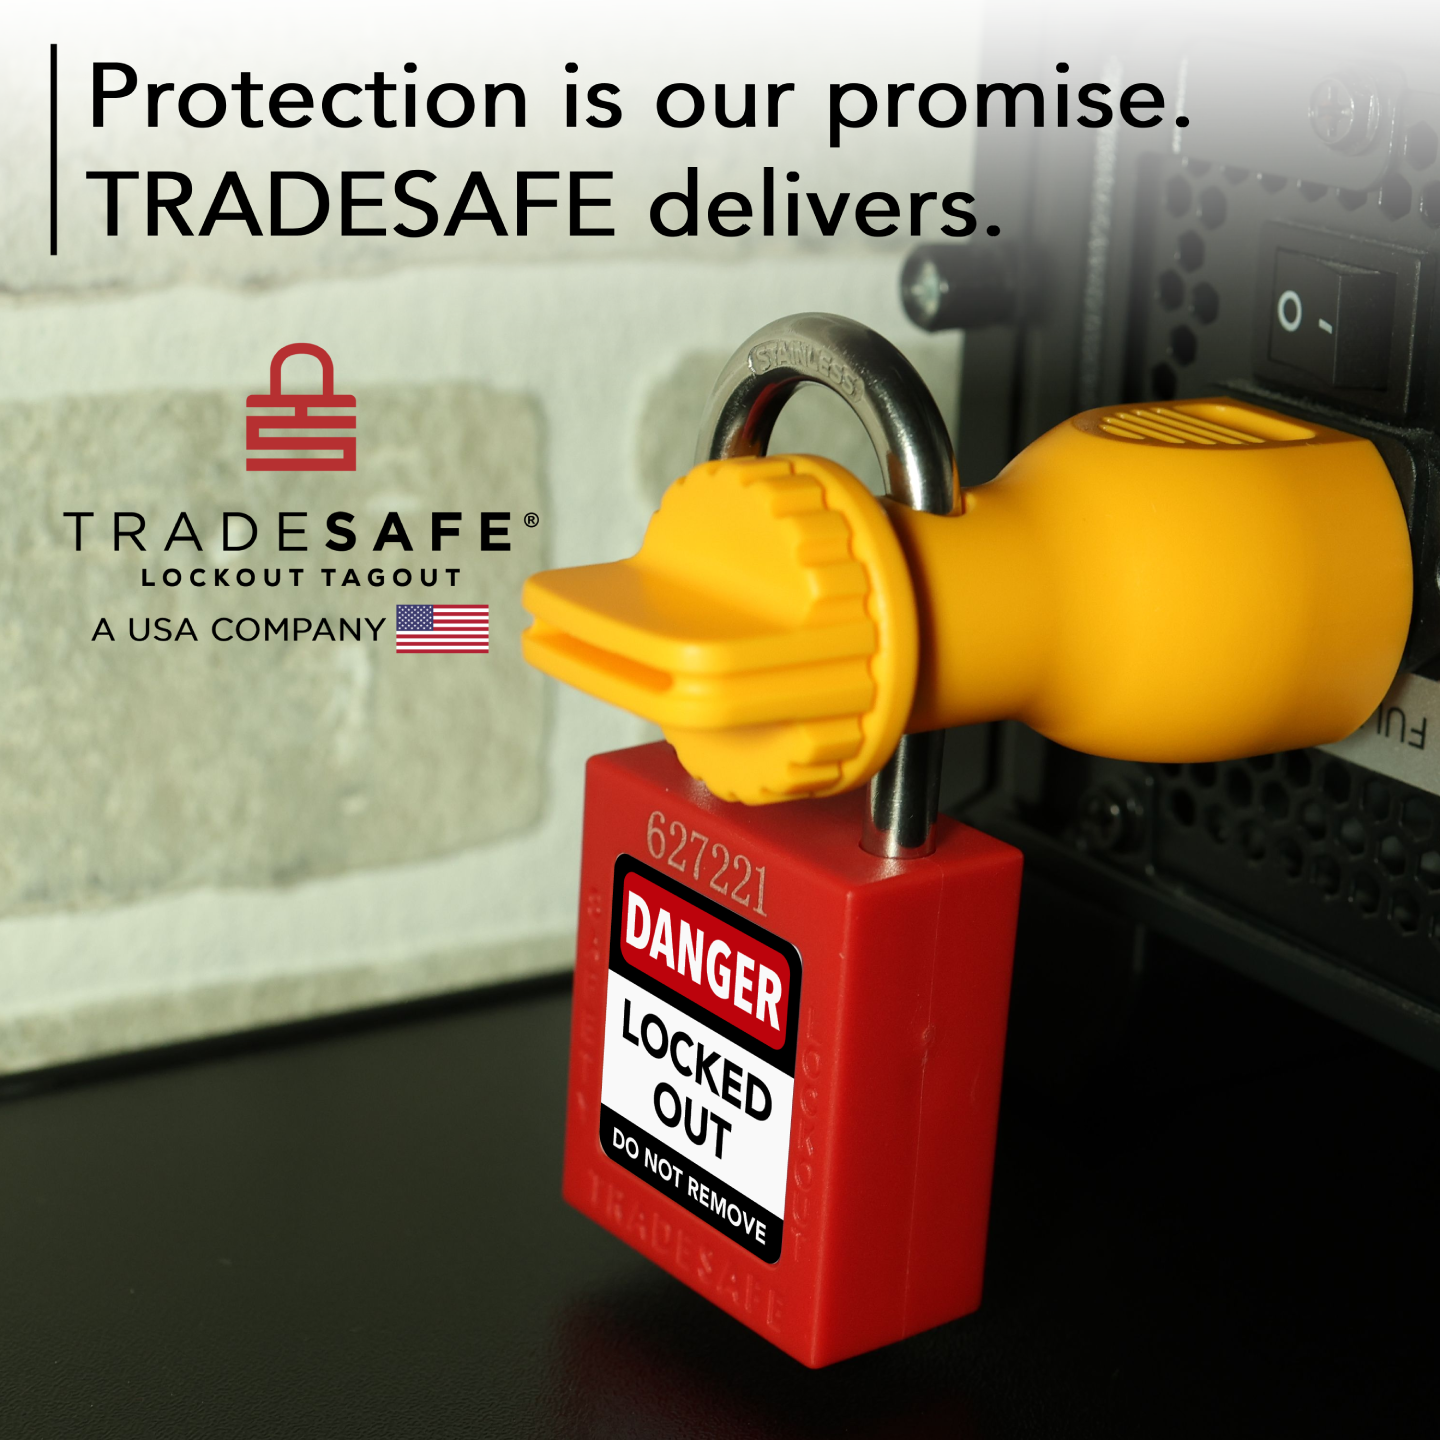 TRADESAFE power plug lock: protection is our promise. tradesafe delivers.